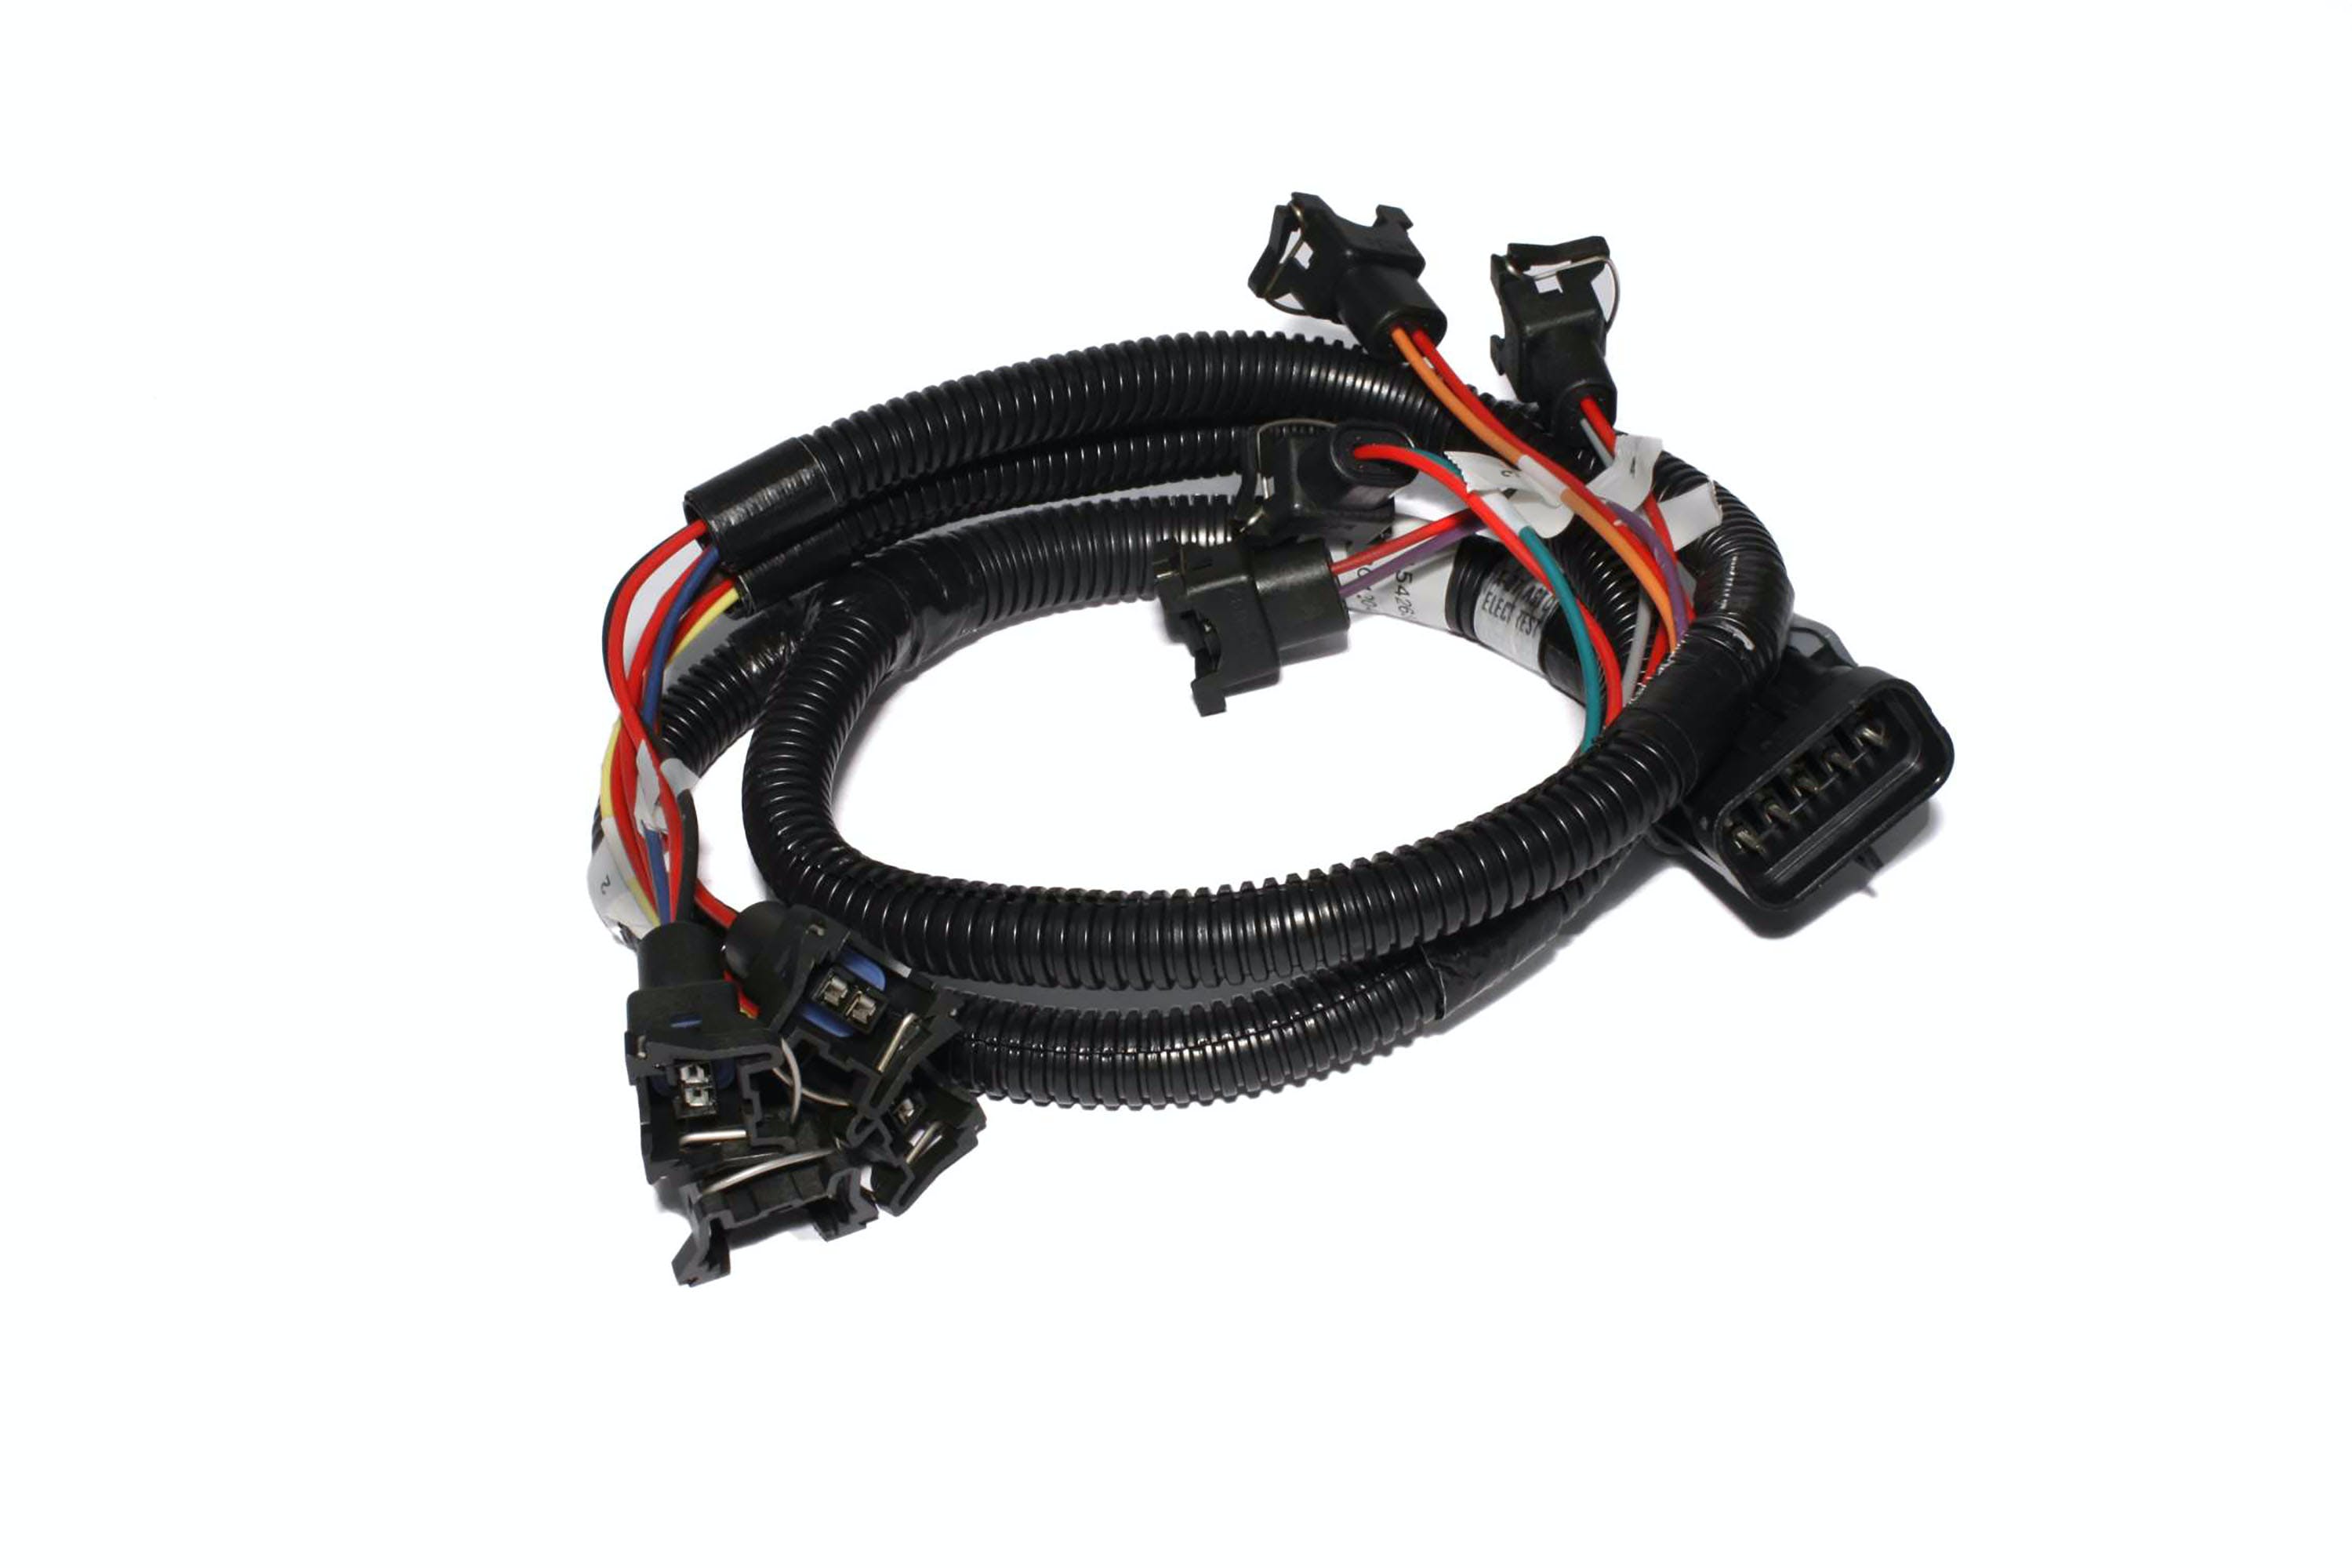 FAST - Fuel Air Spark Technology 301204 XFI Fuel Inector Harness for Ford Small Block, FE and Big Block engines.